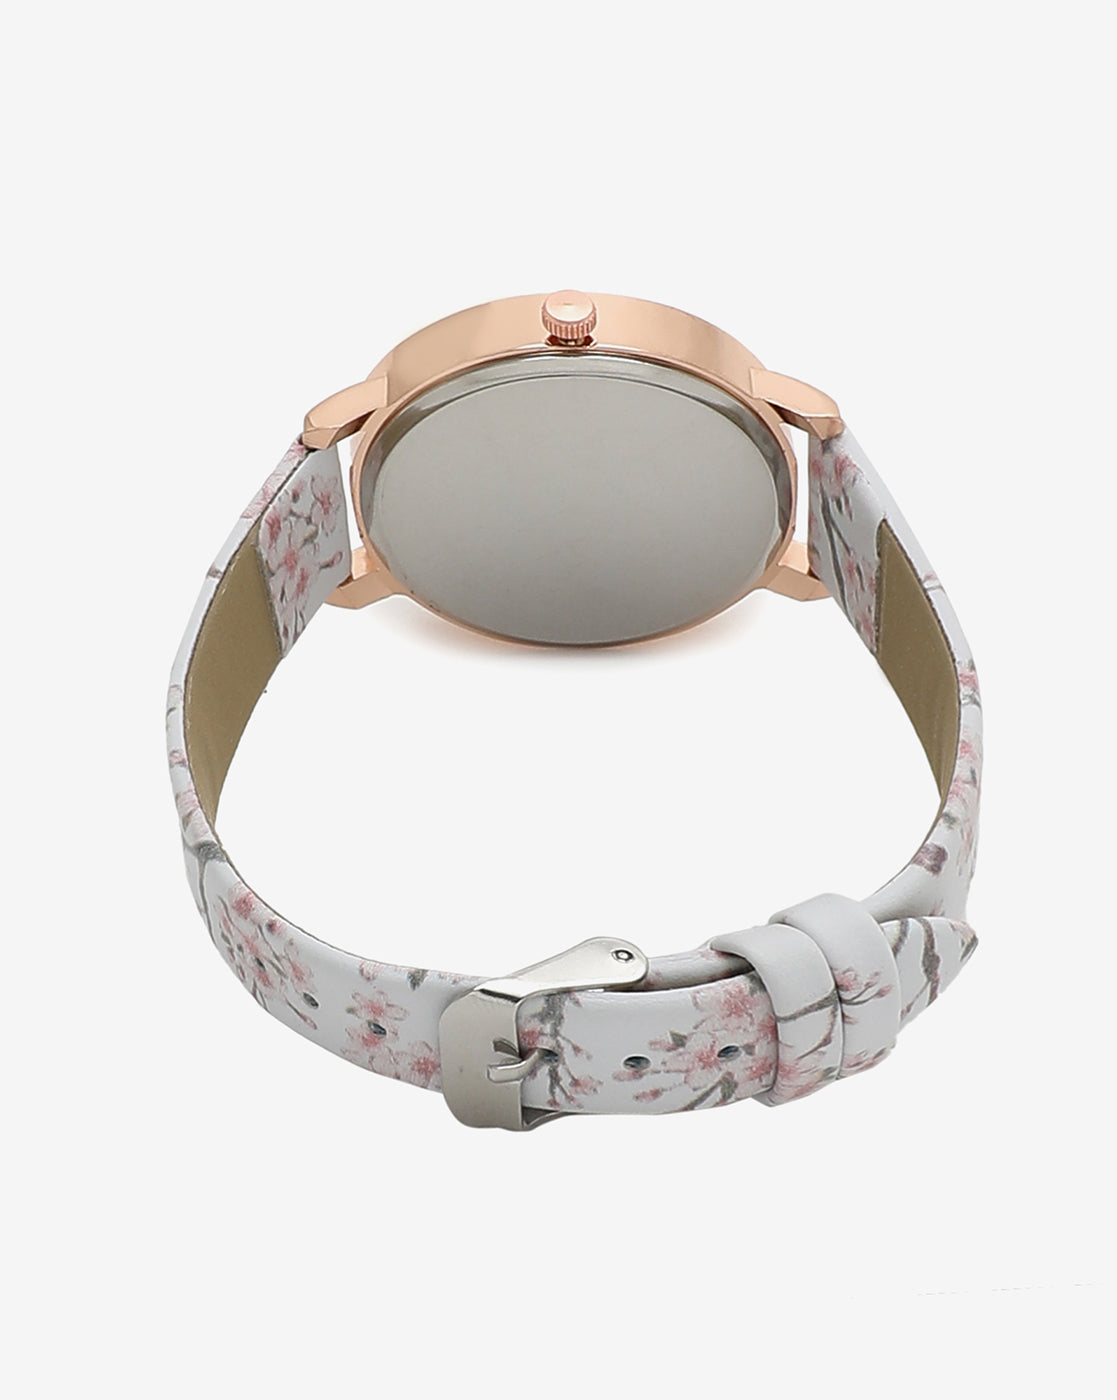 White & Gold Decorative Analog Round Dial With Floral Printed Leather Strap